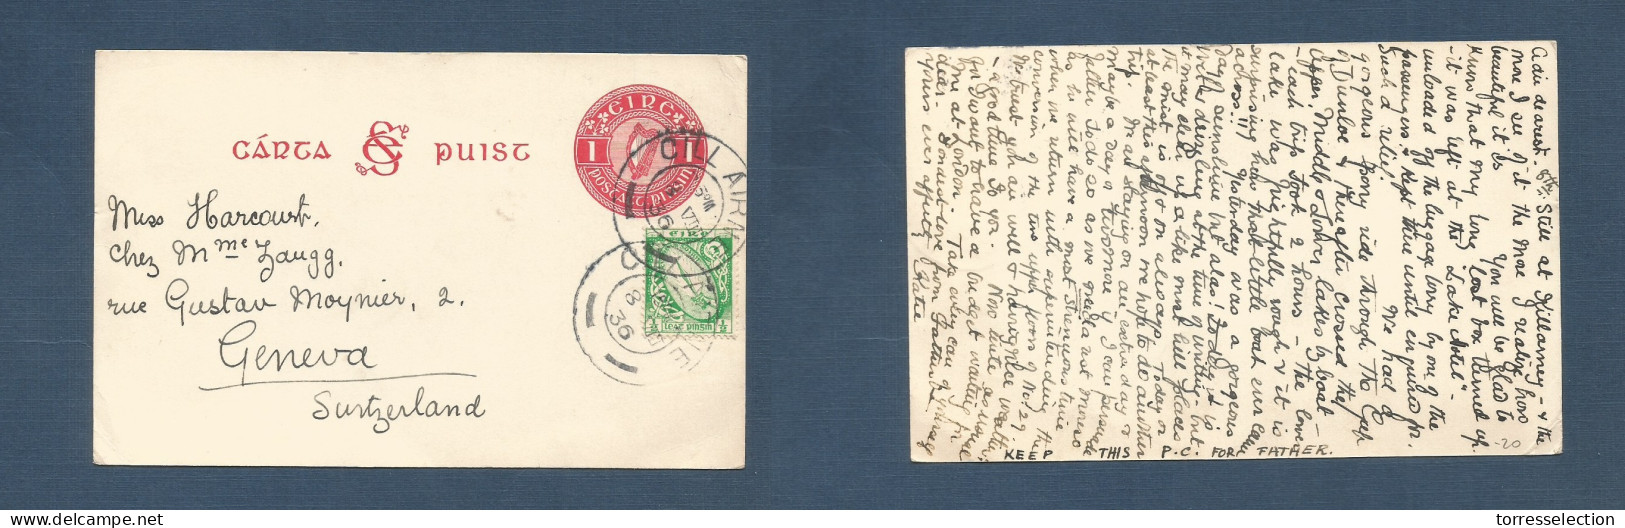 EIRE. 1936 (8 Aug) Cill Airne - Switzerland, Geneva. 1d Red Stt Card + Adtl, Tied Cds. XSALE. - Used Stamps